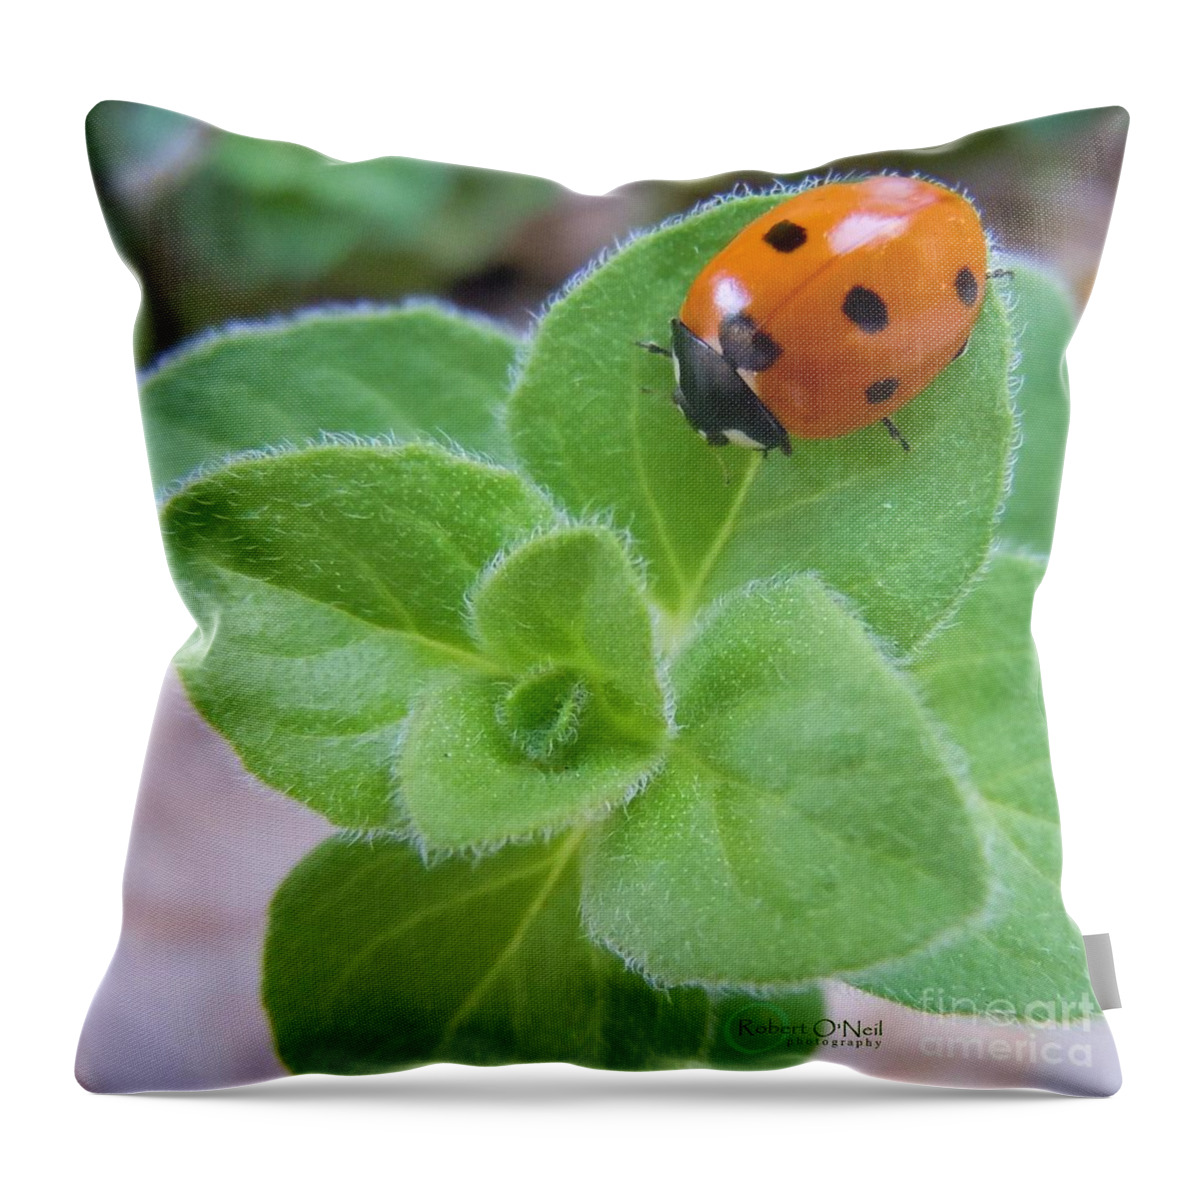 Ladybug Throw Pillow featuring the photograph Ladybug and Oregano by Robert ONeil